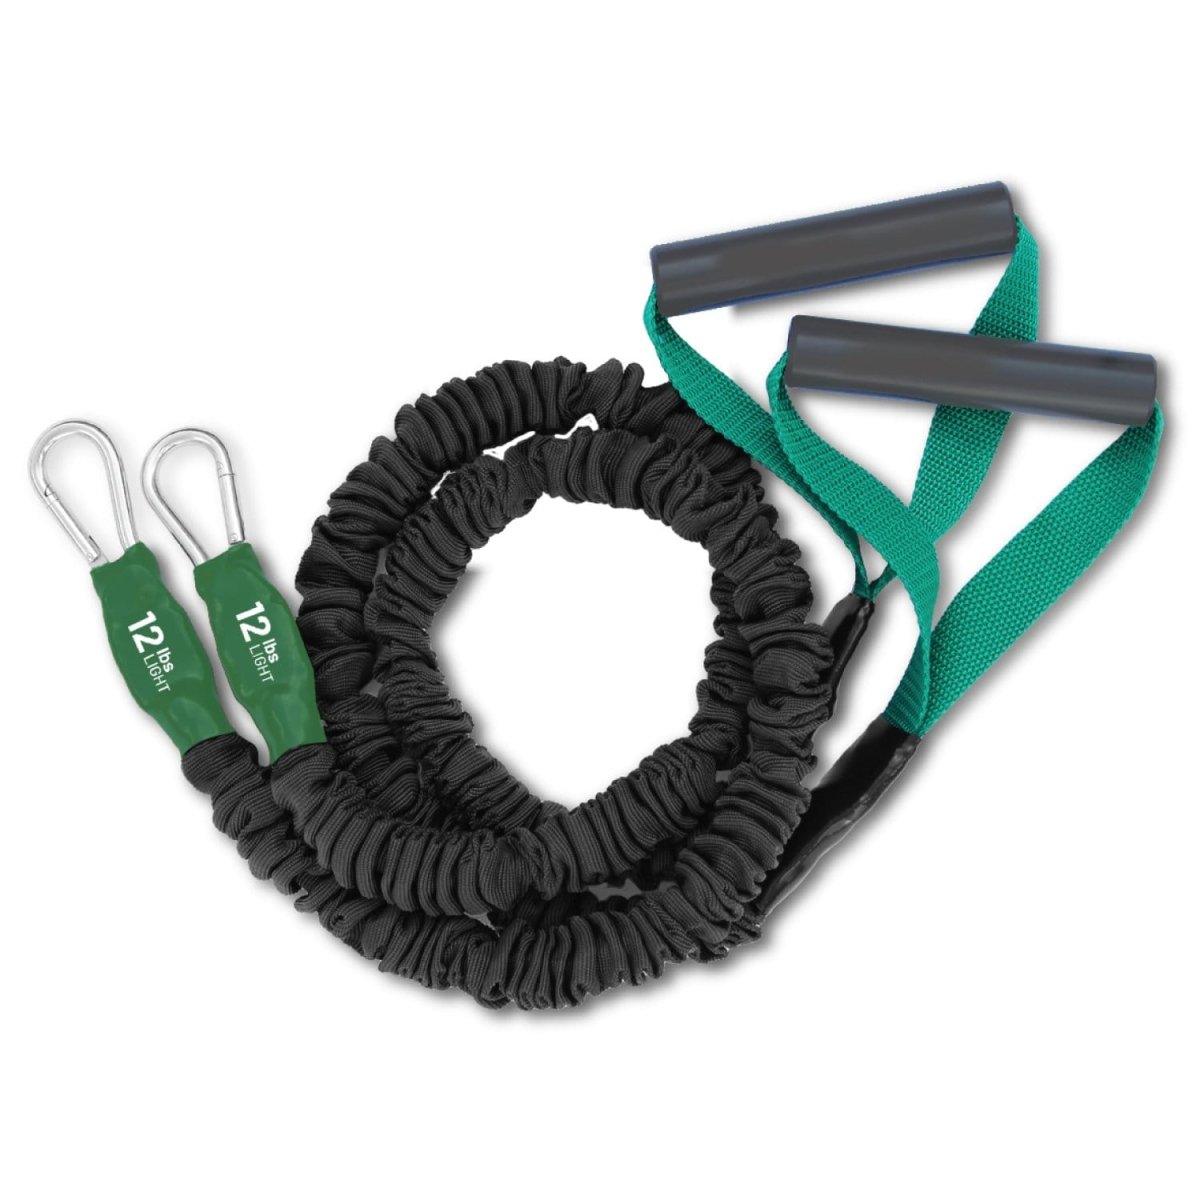 X-Over Cable Crossover  Cord Home Gym Bundle- Intermediate 1 best resistance bands made in USA and covered for safety - FitCord Resistance Bands